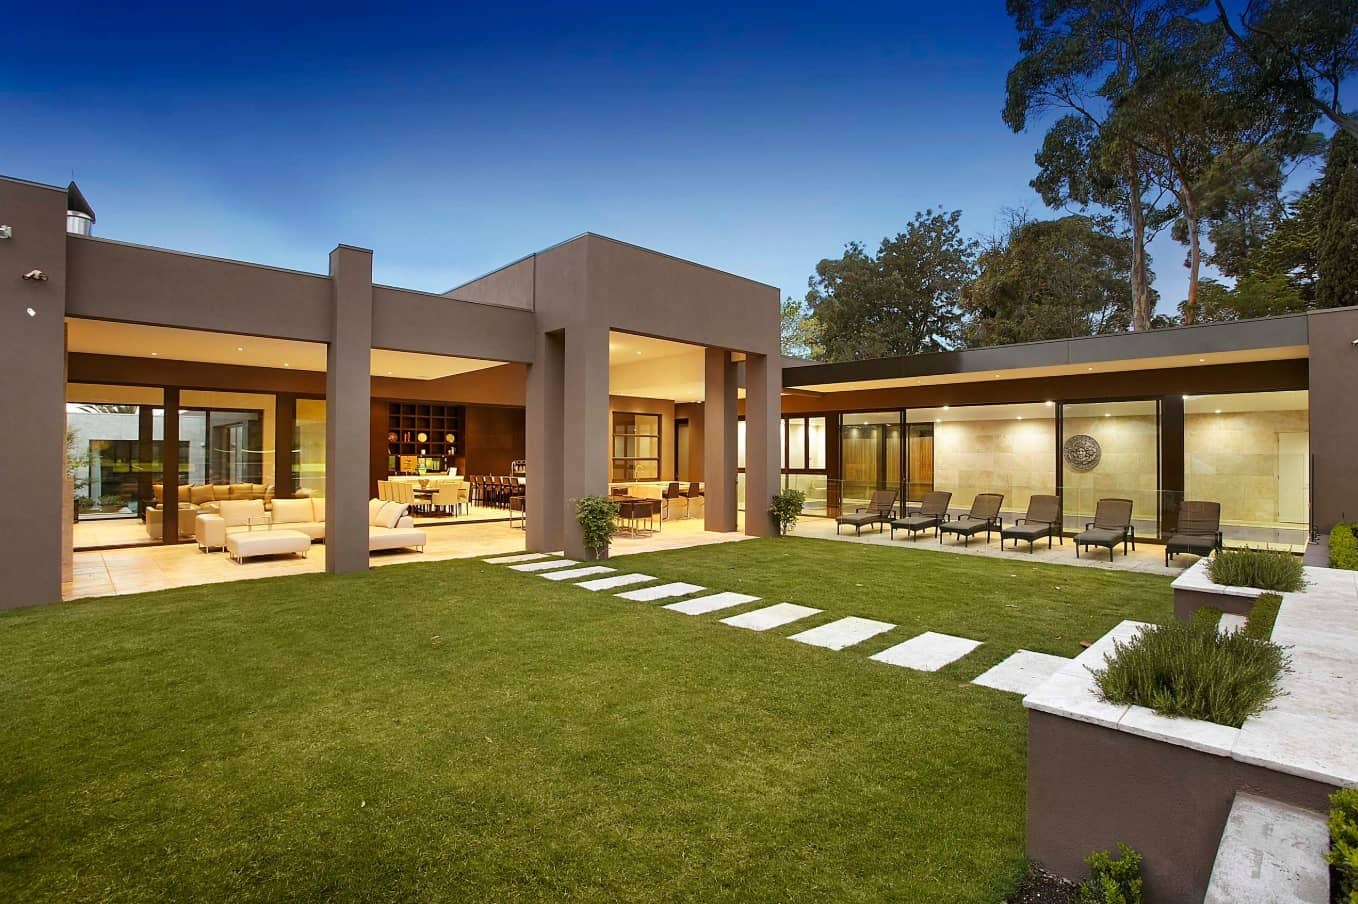 Great Ways to Upgrade Your Yard. Supermodern house with columns and squared forms